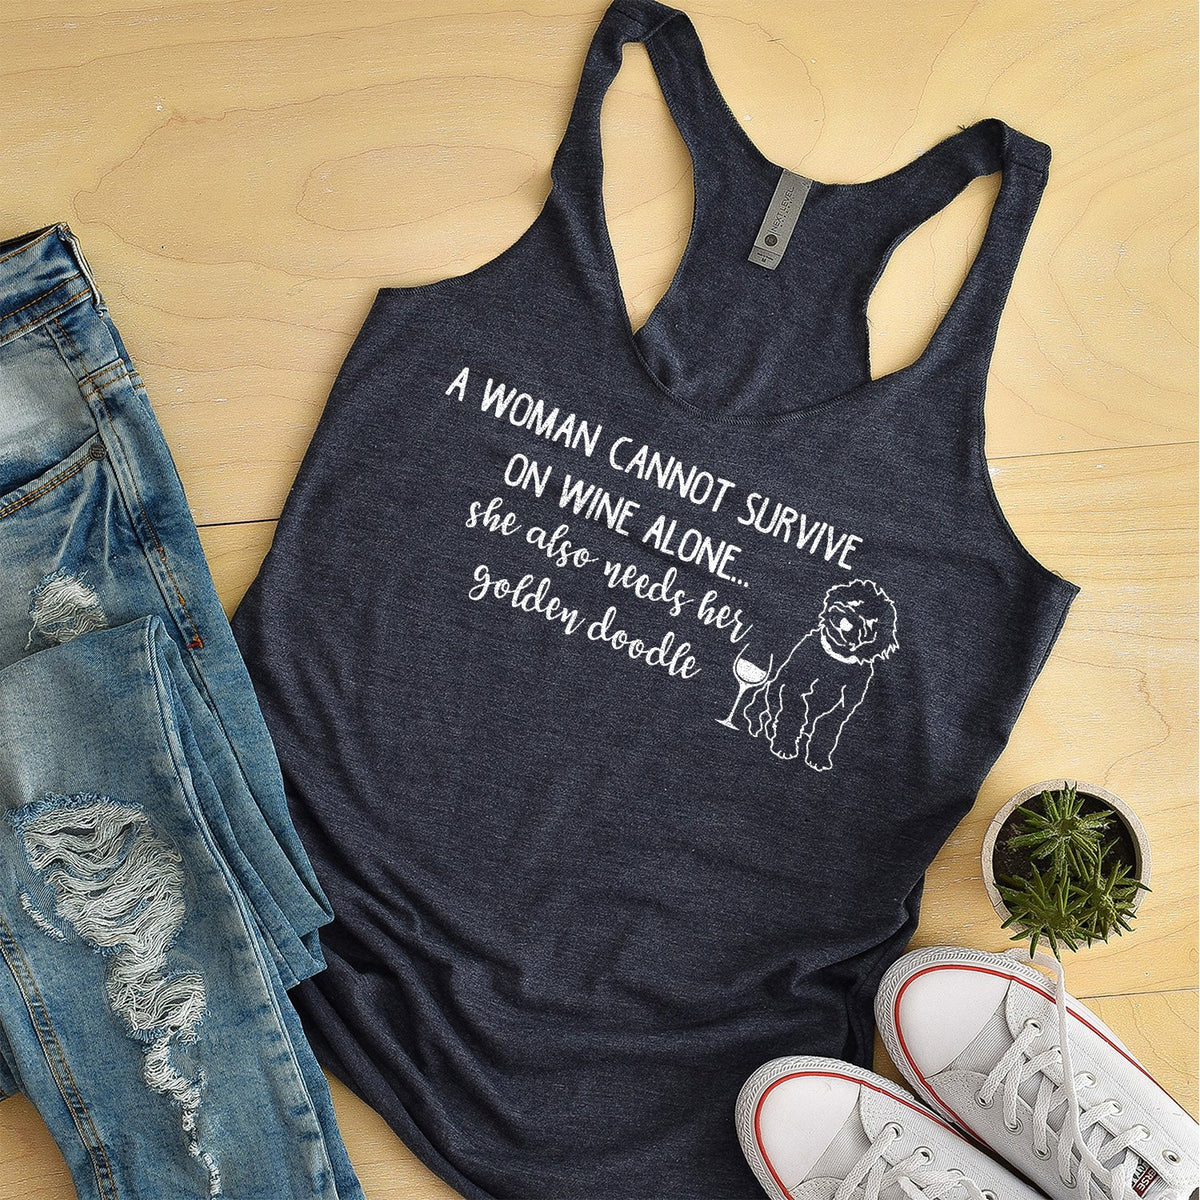 A Woman Cannot Survive on Wine Alone, She also Needs her Golden Doodle - Tank Top Racerback